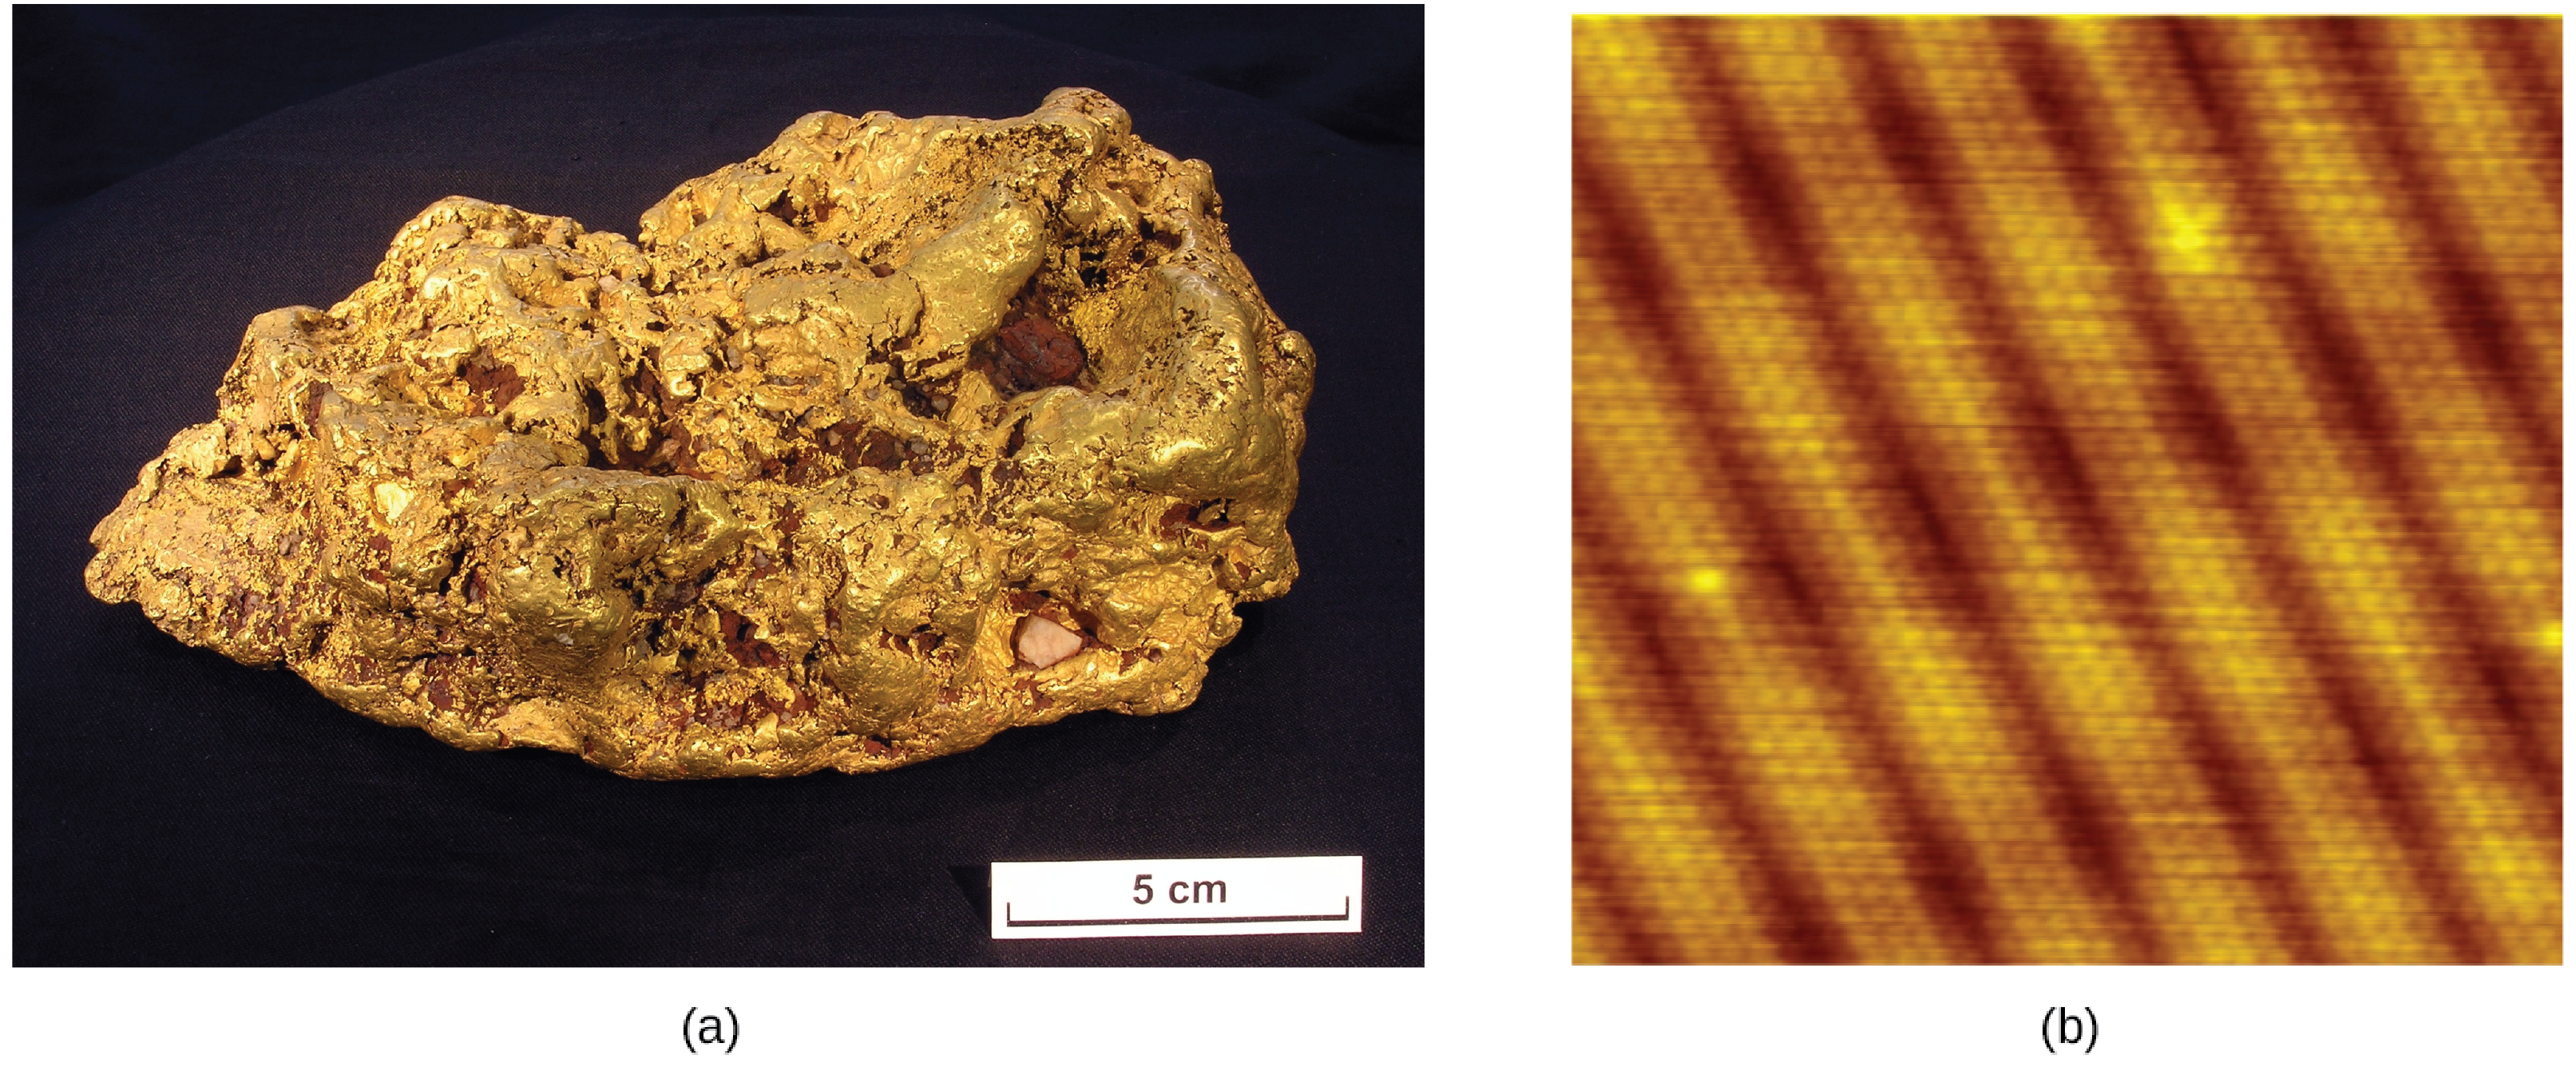 A gold nugget, as it would appear to the naked eye, is very irregular, with many sharp edges. The microscope image of a gold crystal shows many similarly sized gold stripes that are separated by dark areas. Looking closely, one can see that the gold stripes are made of many, tiny, circular atoms.